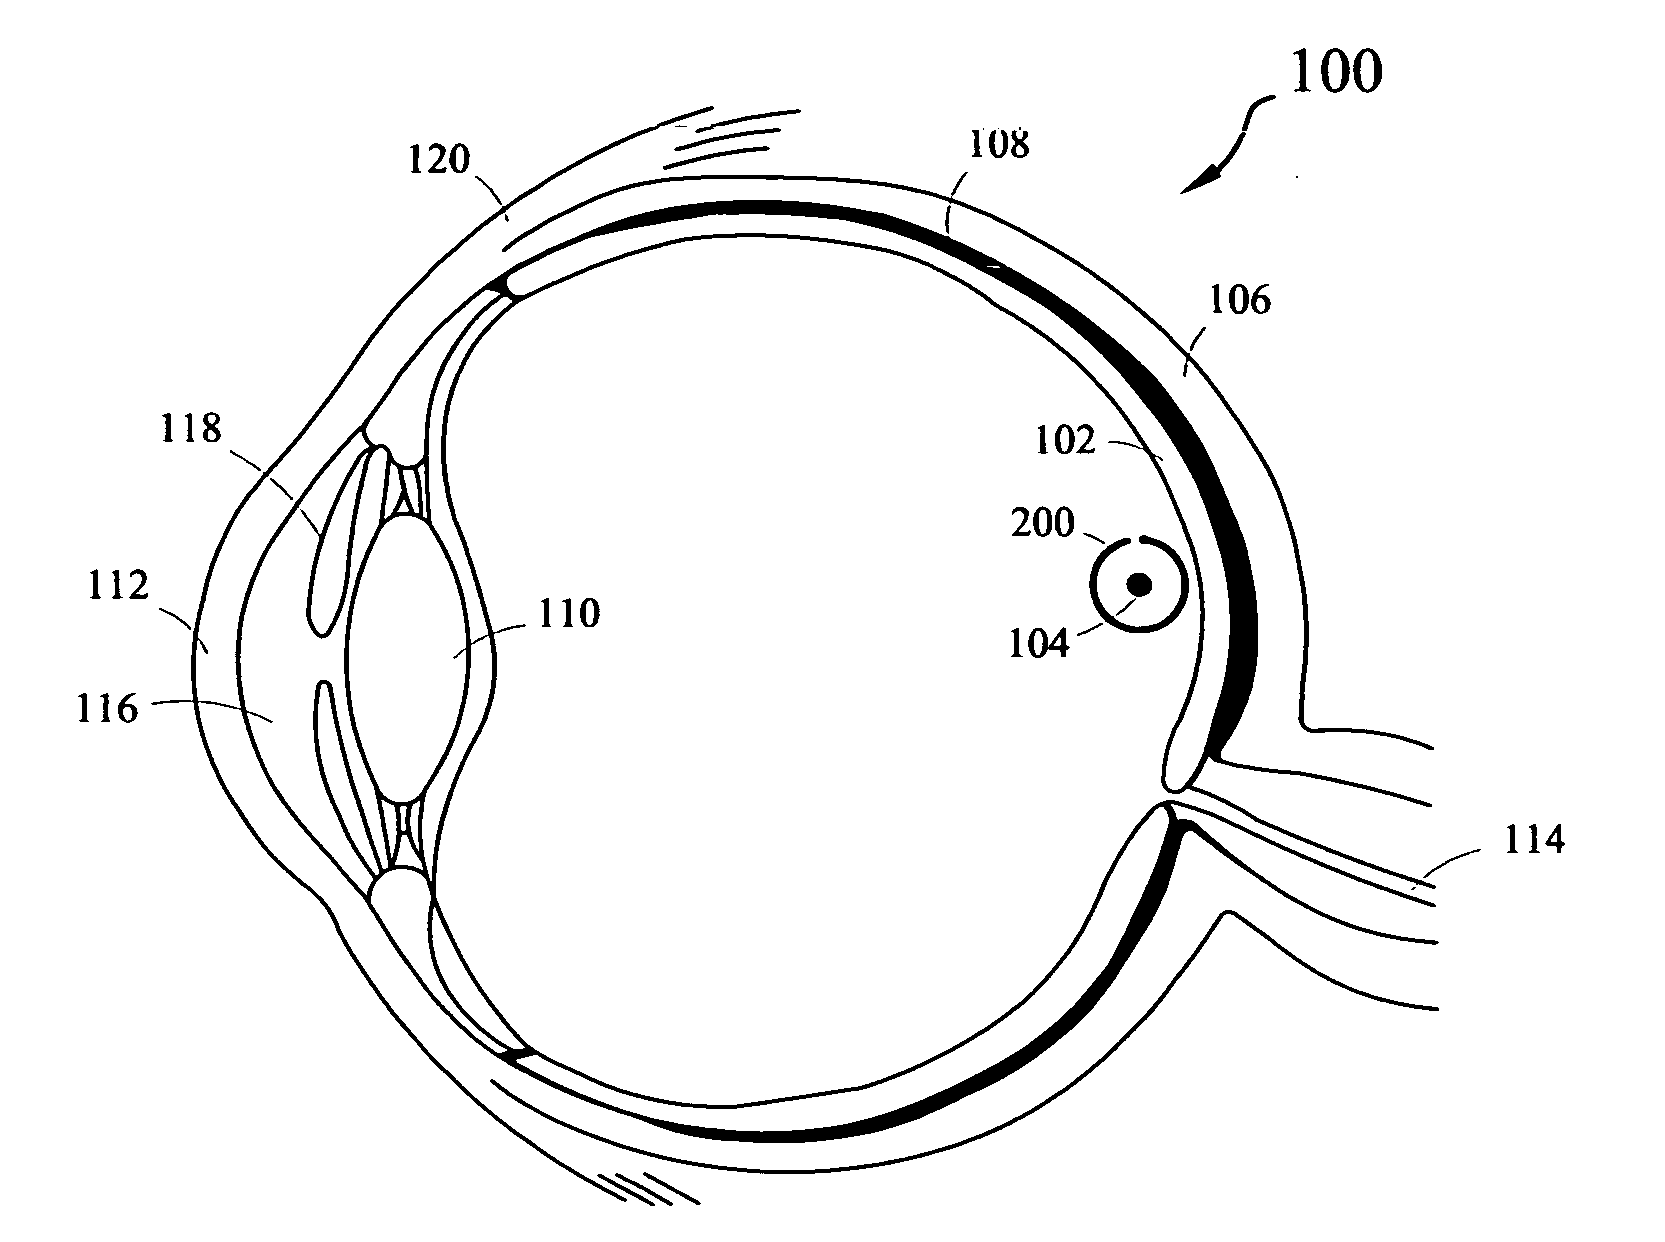 System for maintaining normal health of retinal cells and promoting regeneration of retinal cells